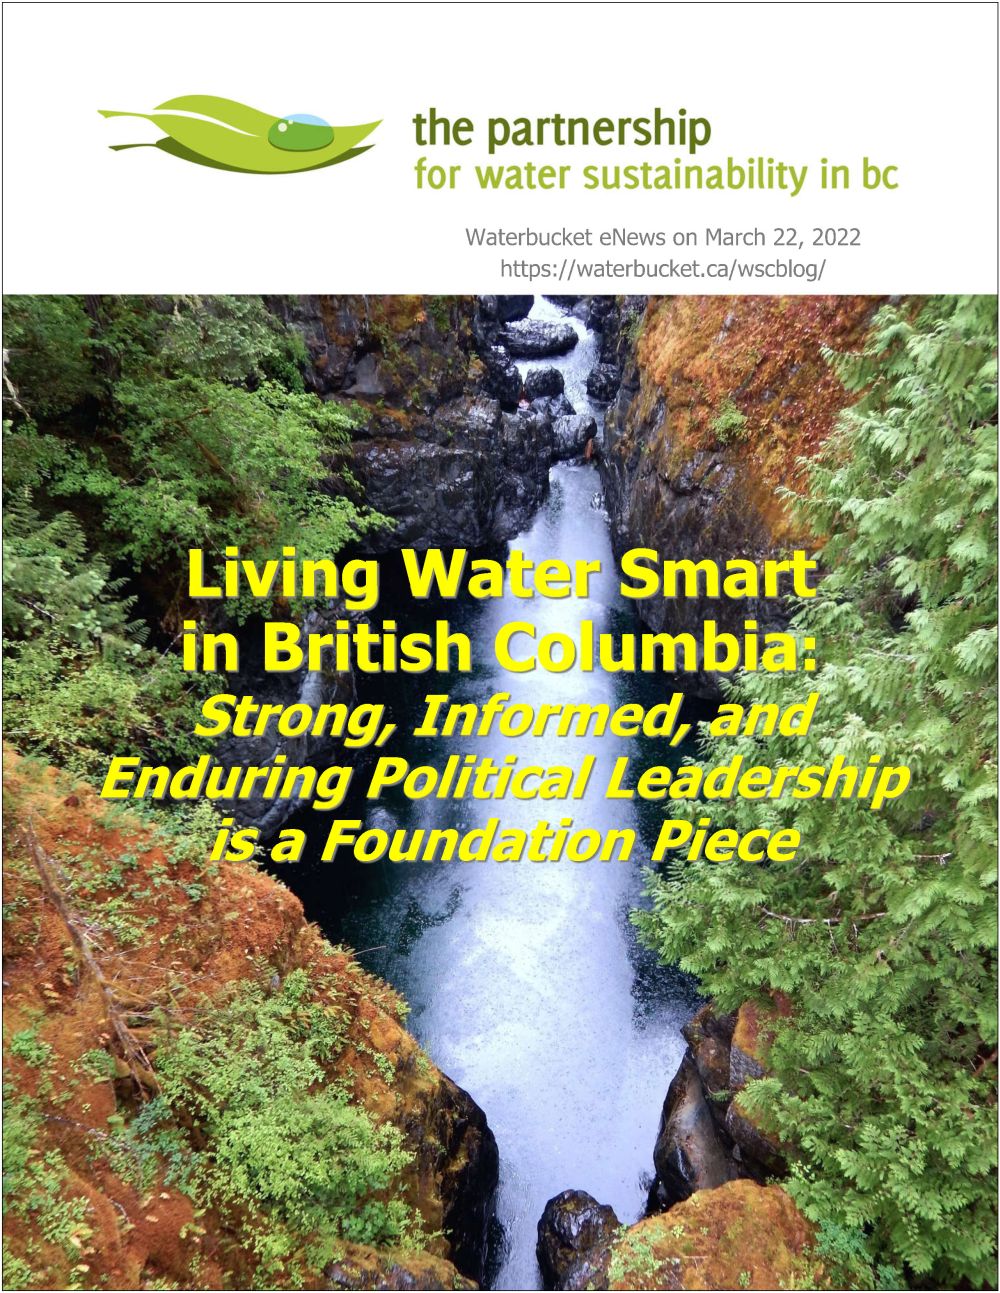 pwsbc-living-water-smart-political-leadership-convening-for-action-in